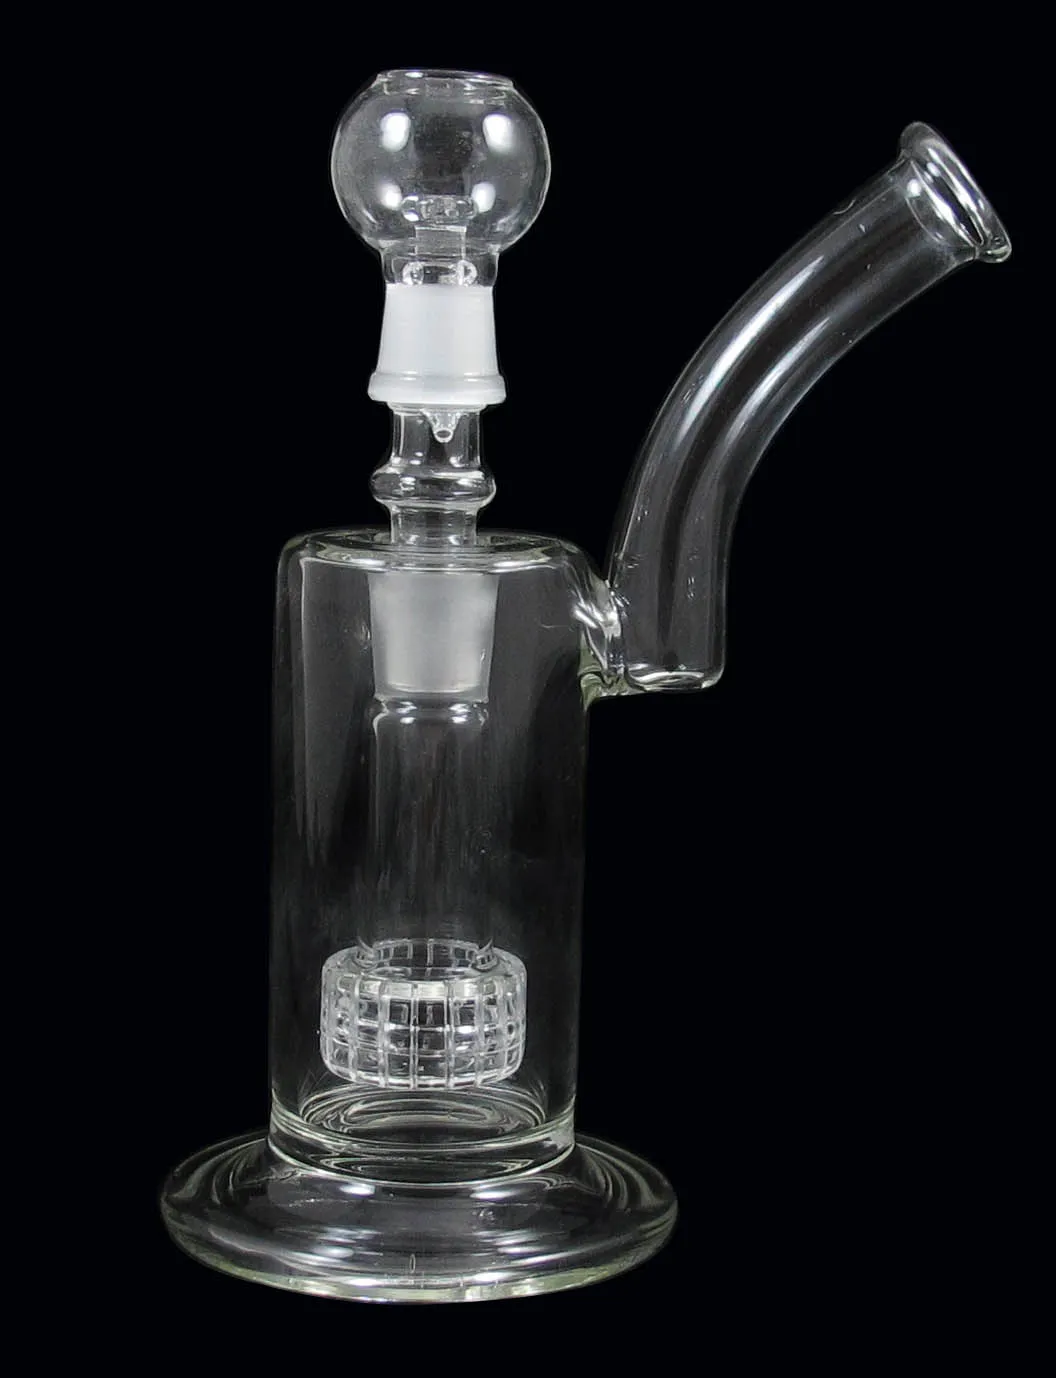 Bulk Order Handmade 9 Inch Glass Bong With Bubbler, Sidecar Percolator, And  Water Smoking Function D020 D From Sunshinestore, $214.85